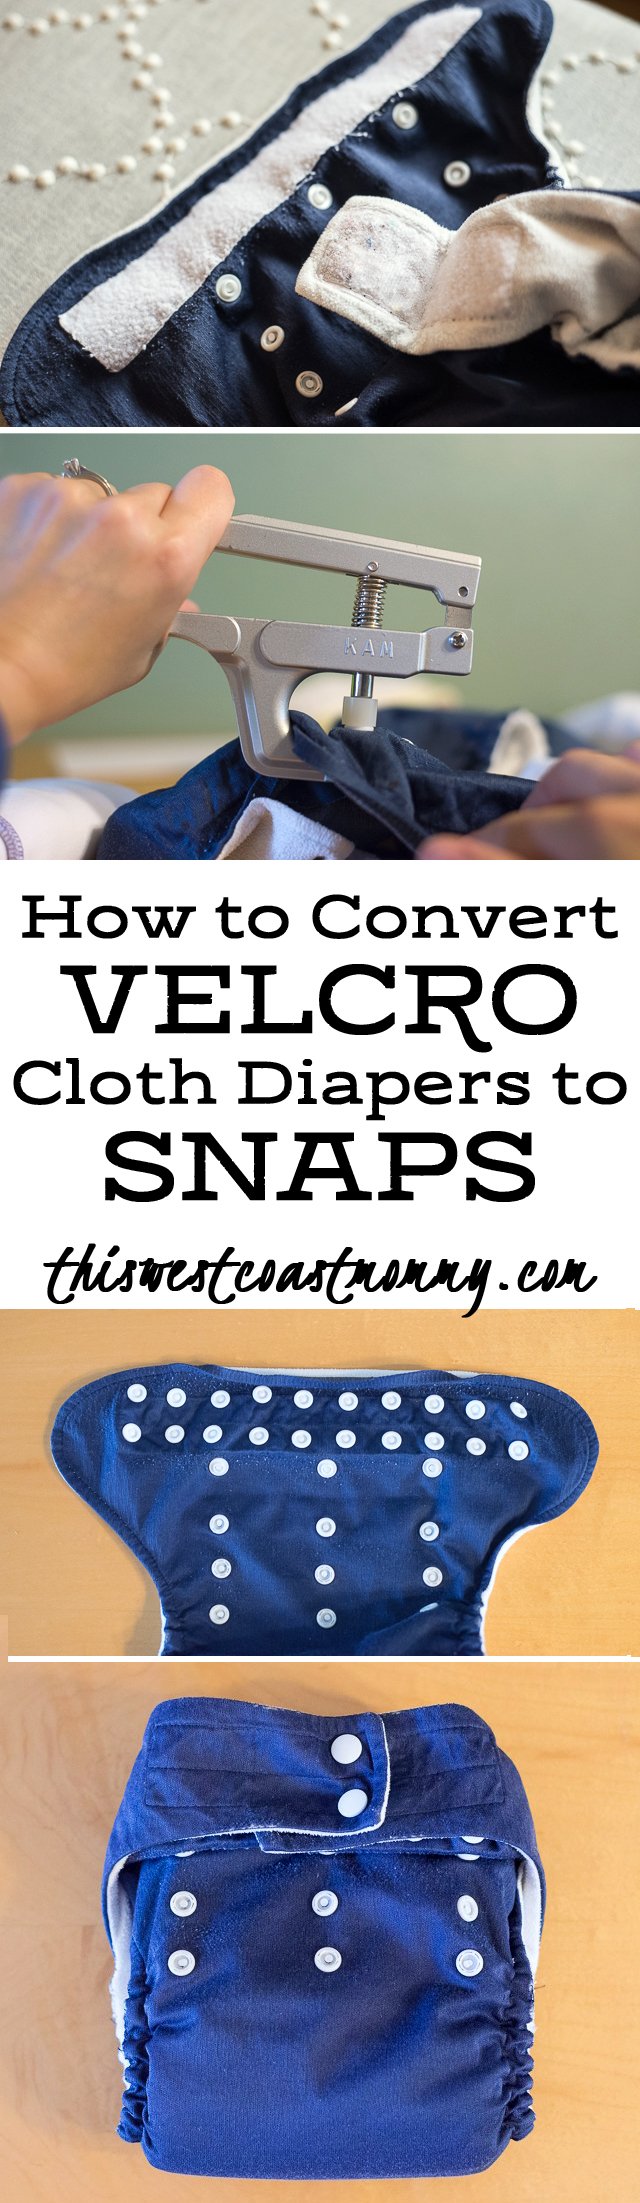 This step by step tutorial will show you how to convert Velcro cloth diapers to snaps. It's easier than you think, and no sewing machine required.